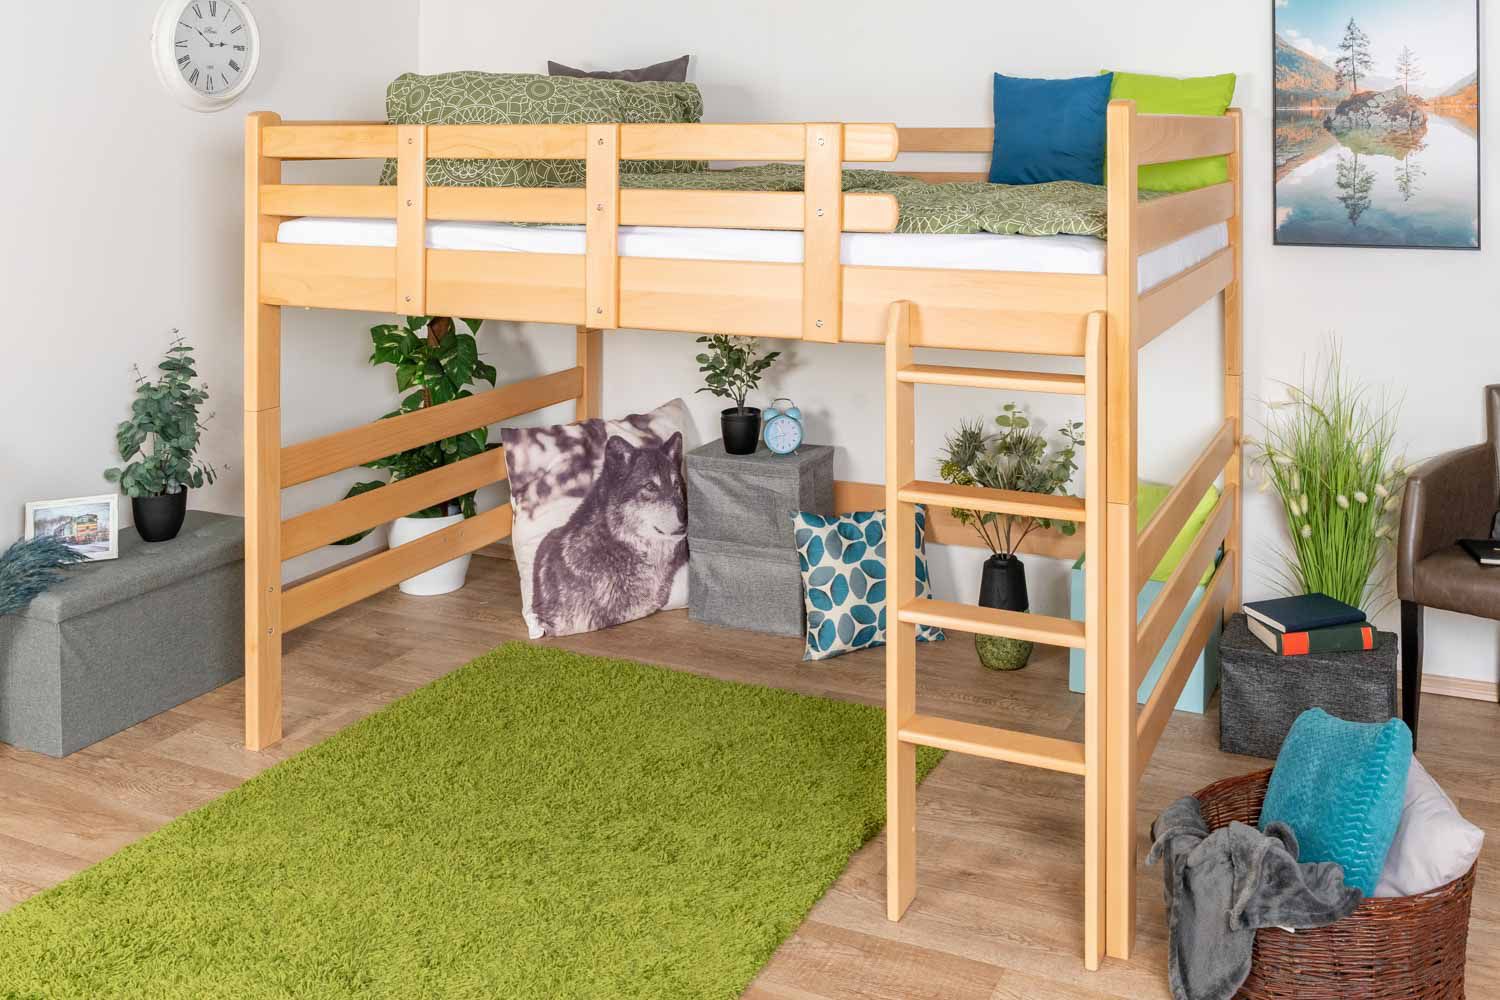 Loft bed 140 x 190 cm for adults "Easy Premium Line" K23/n, solid beech wood natural lacquered, convertible